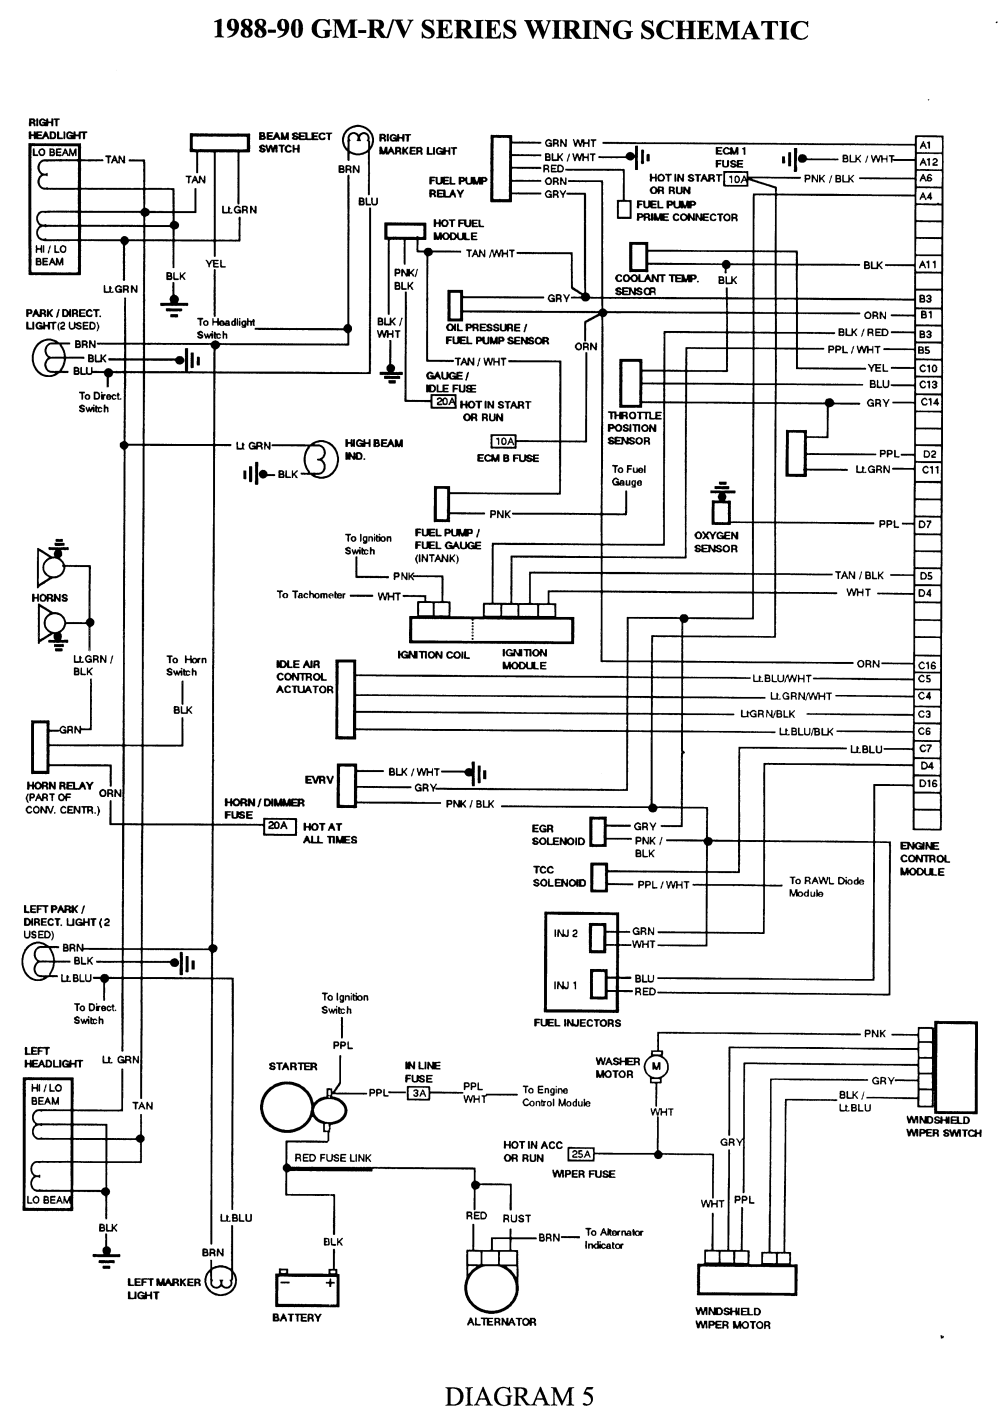 Wiring Harness 1990 Chevy Truck Wiring Diagram from econtent.autozone.com